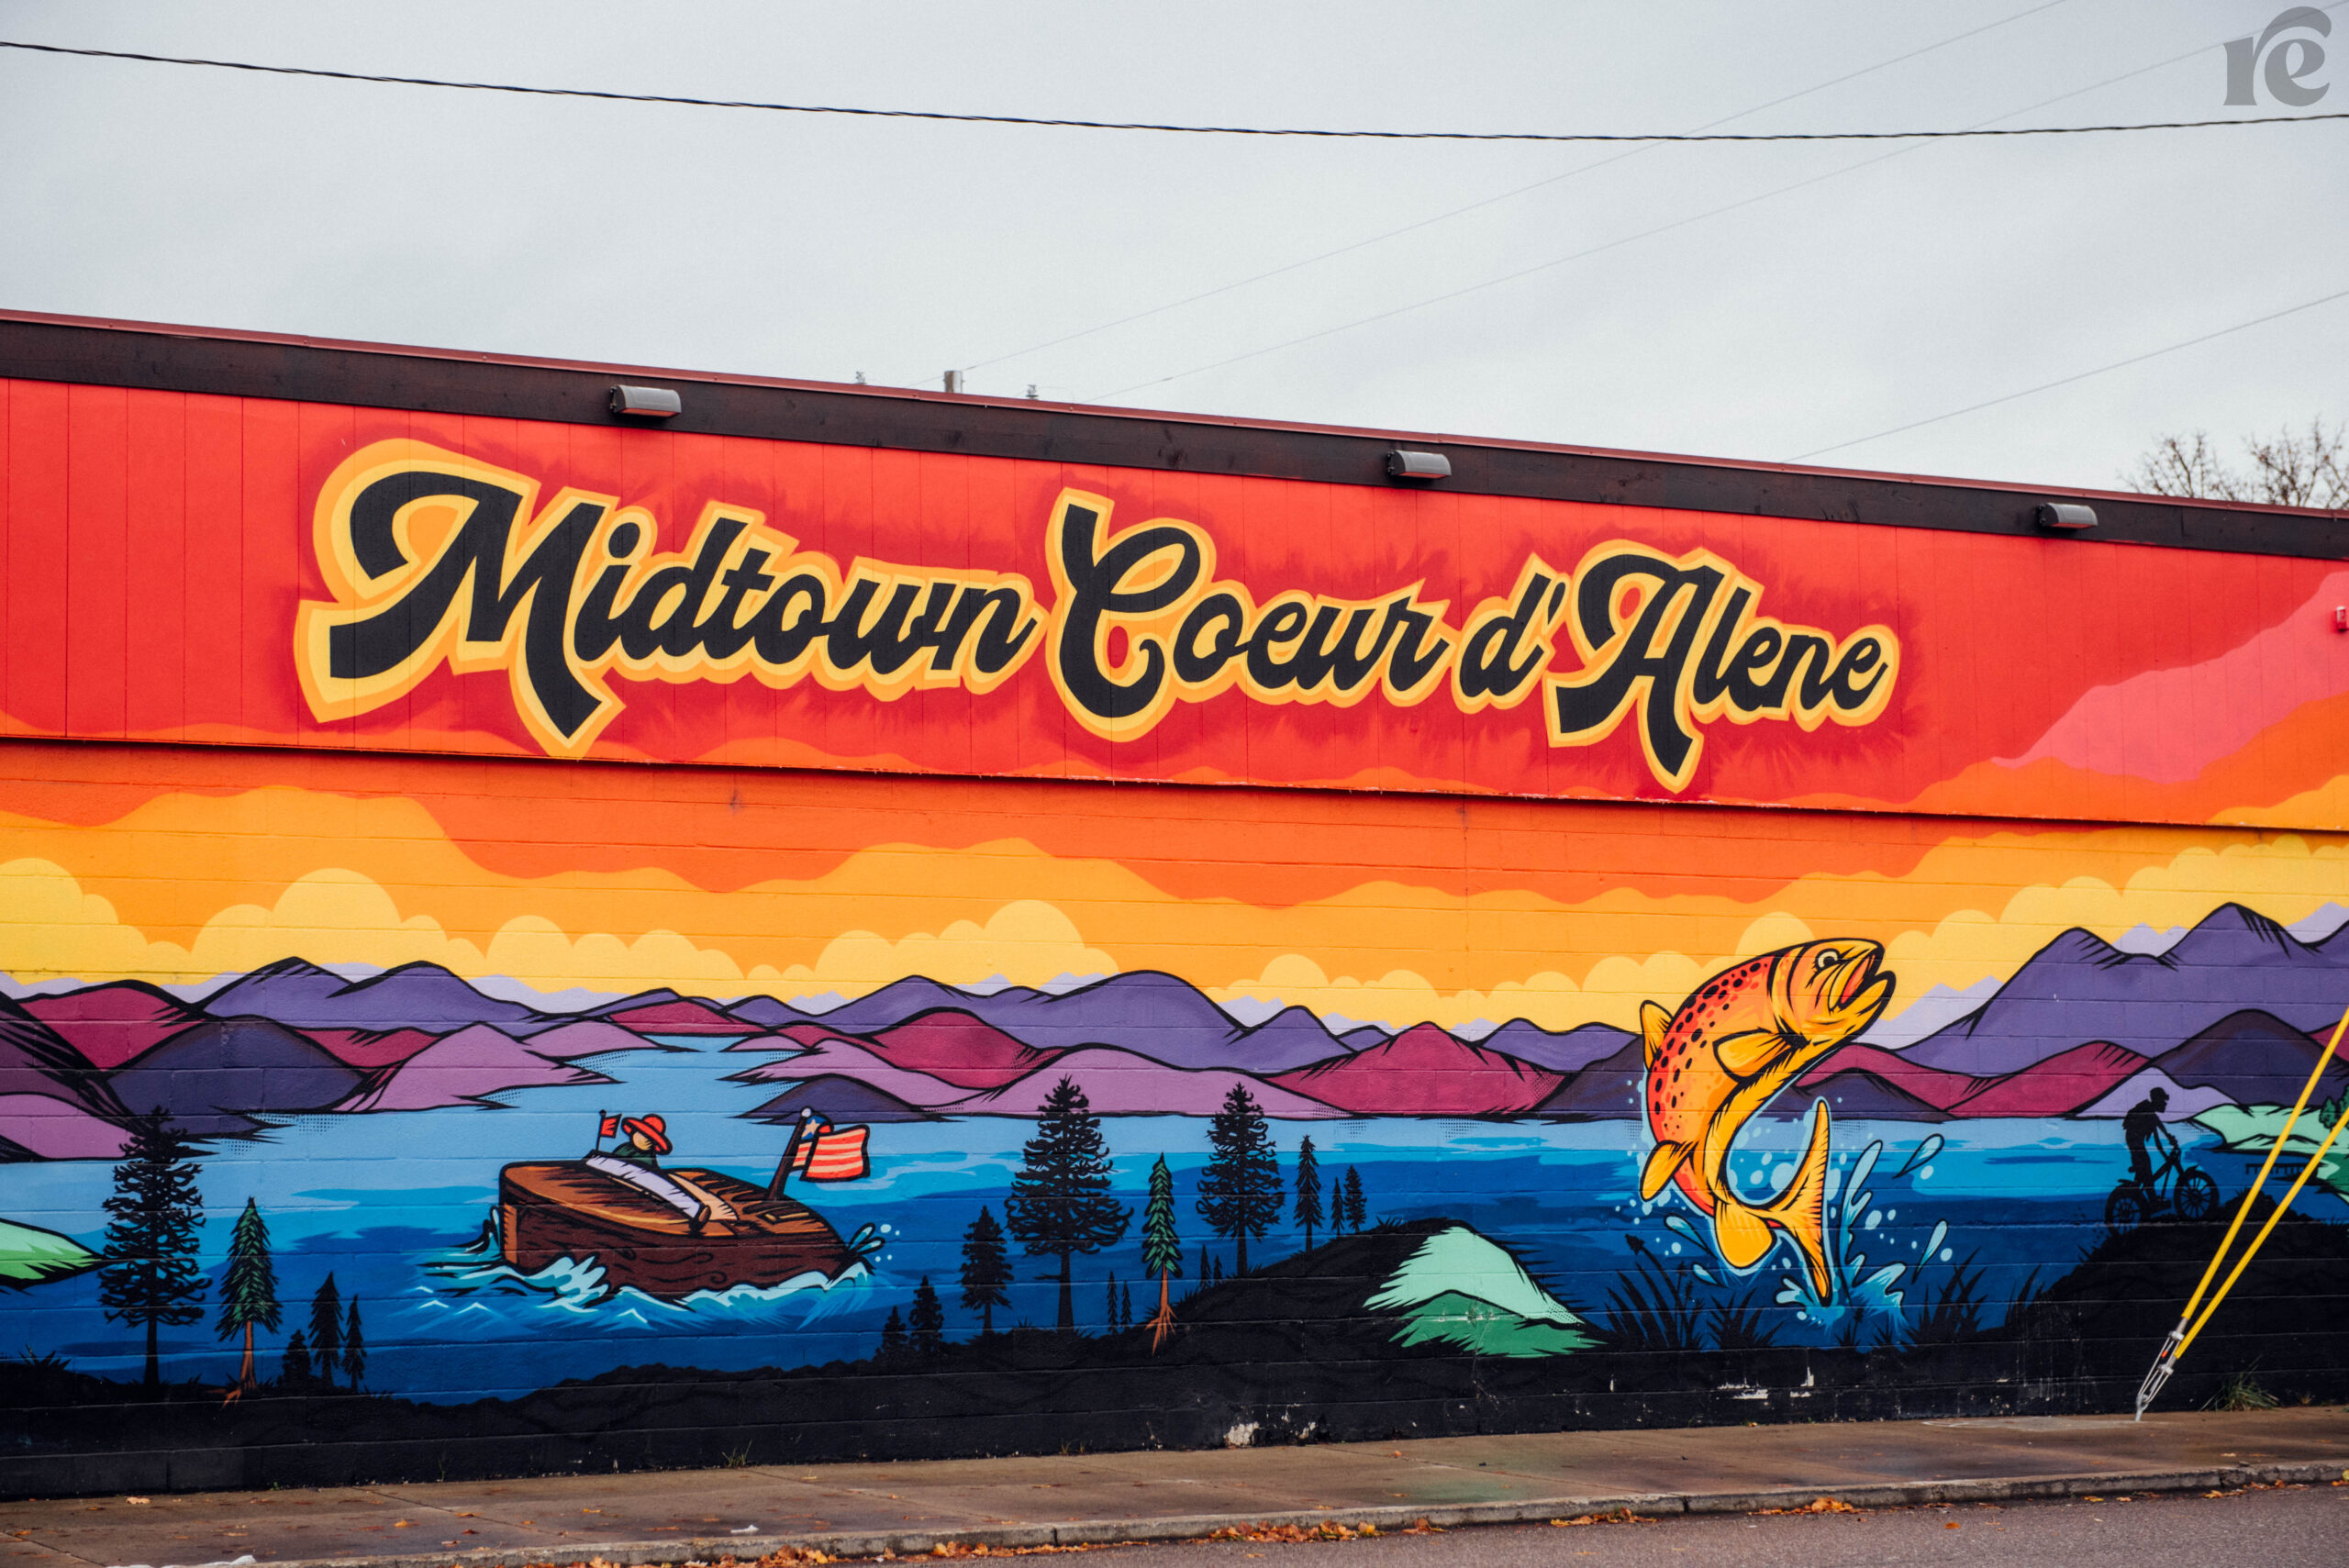 Street art with bright sunset colors and purple mountains that reads Midtown Coeur d'Alene